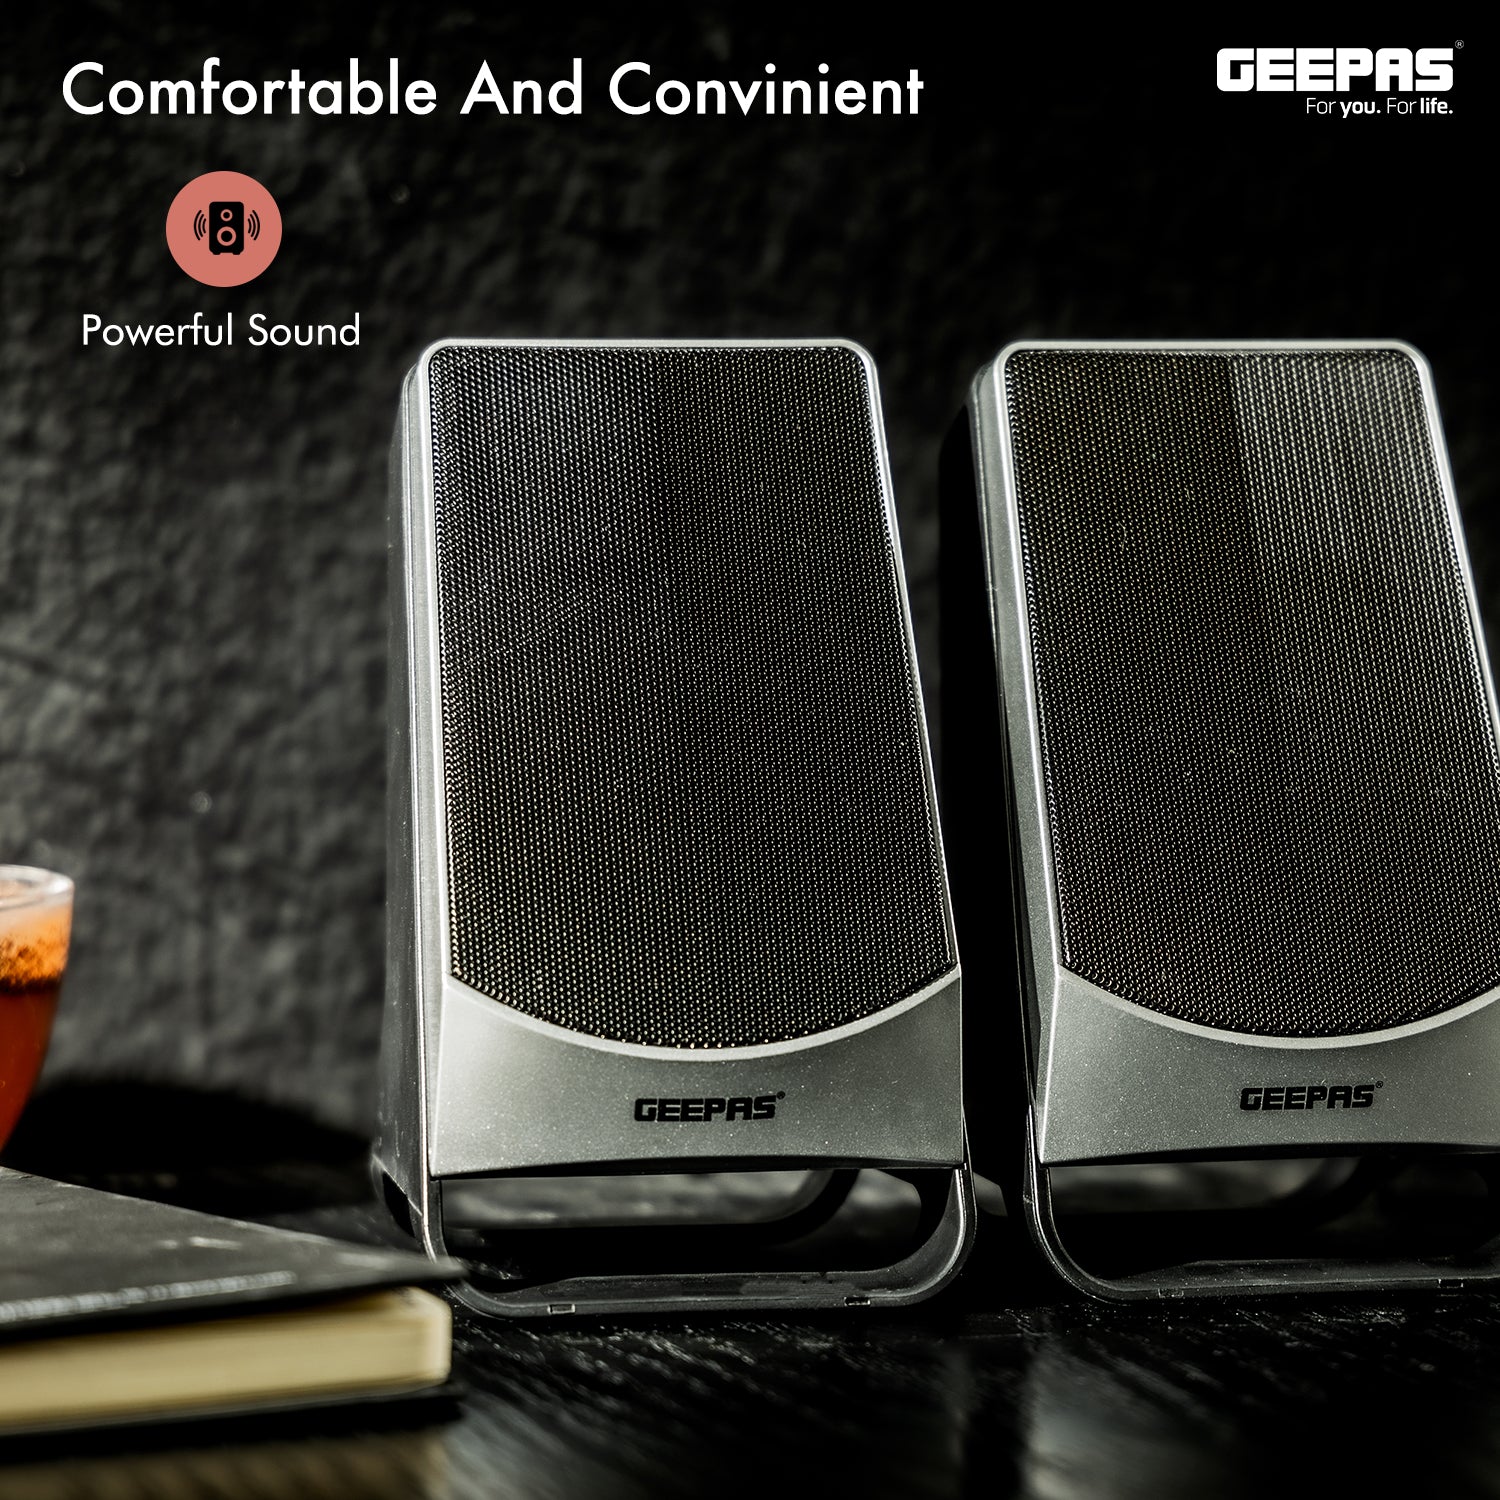 Geepas | For you. For life. Stereo USB Speakers For Laptop, TV and More Speakers